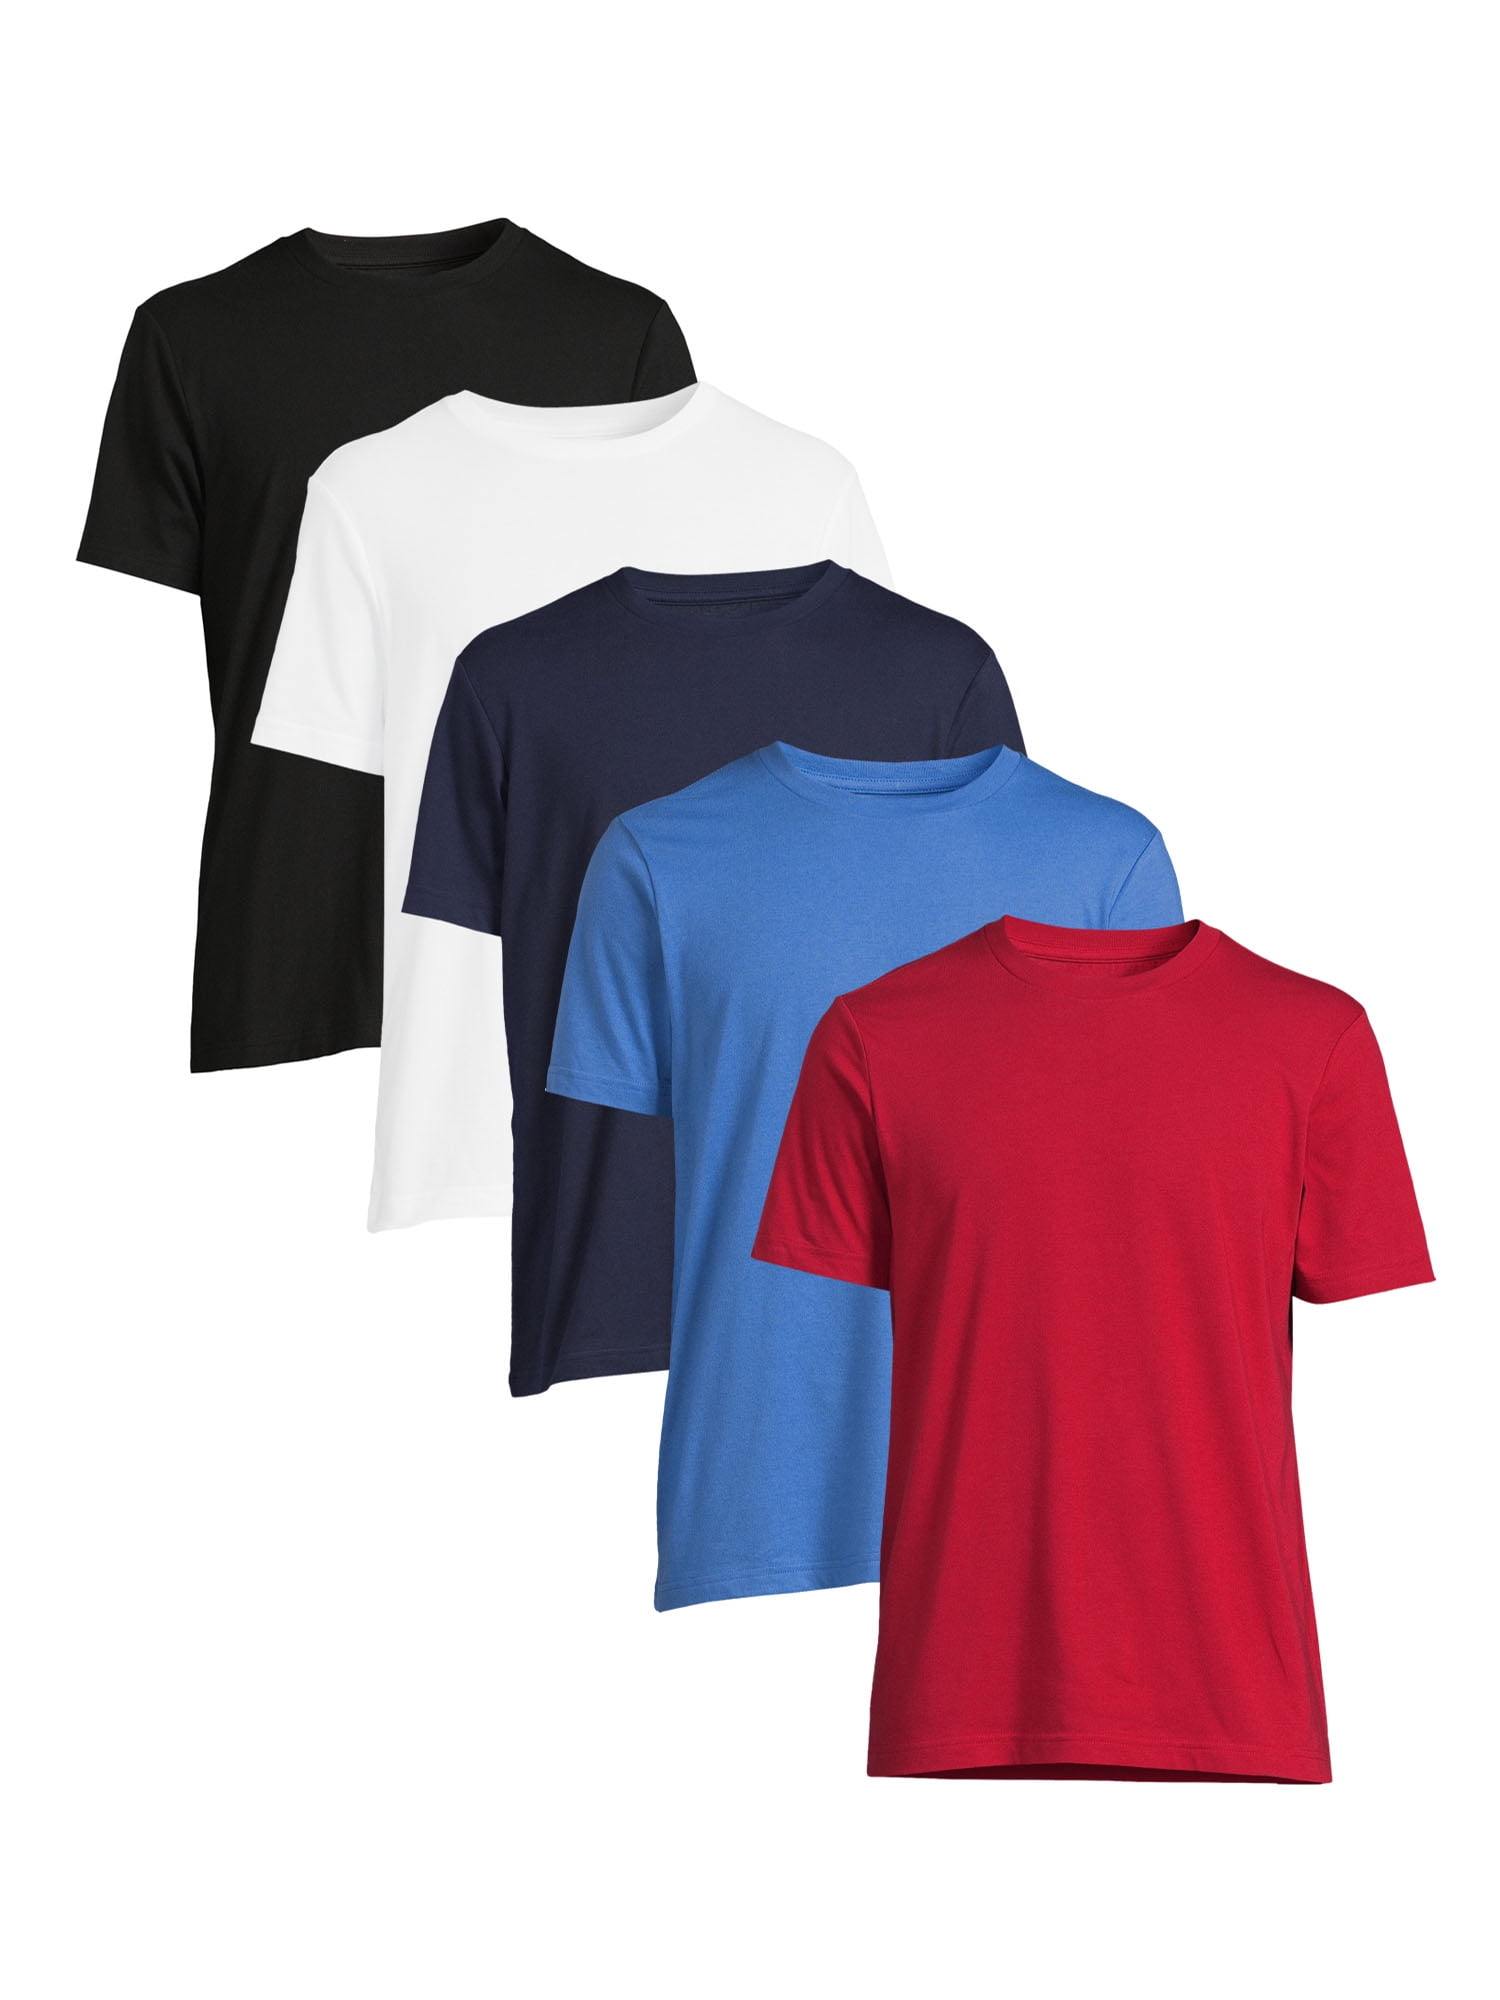 George Men's and Big Men's Short Sleeve Crew Tee, 5-Pack, Sizes XS-3XL ...